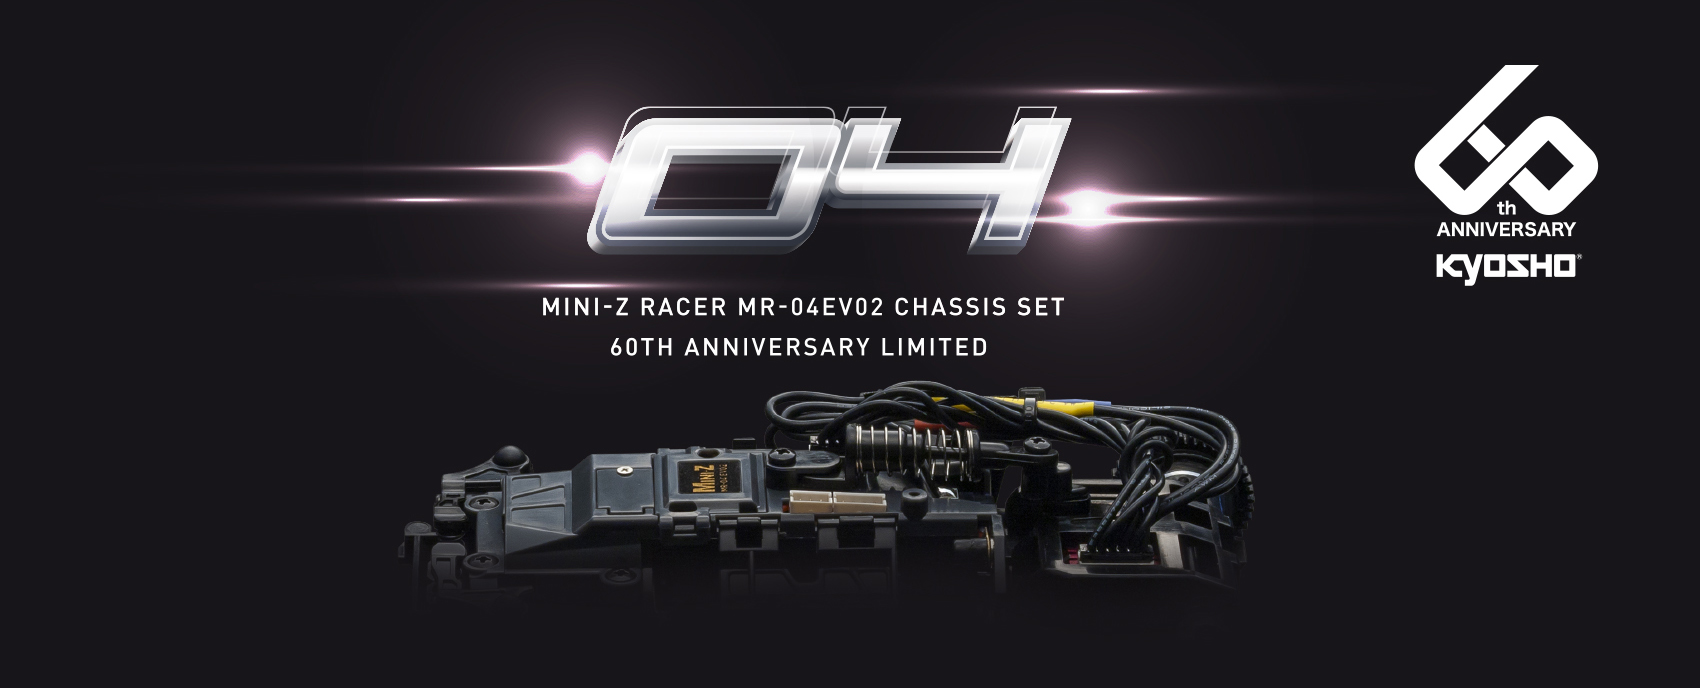 MINI-Z RACER MR-04EV02 CHASSIS SET 60TH ANNIVERSARY LIMITED